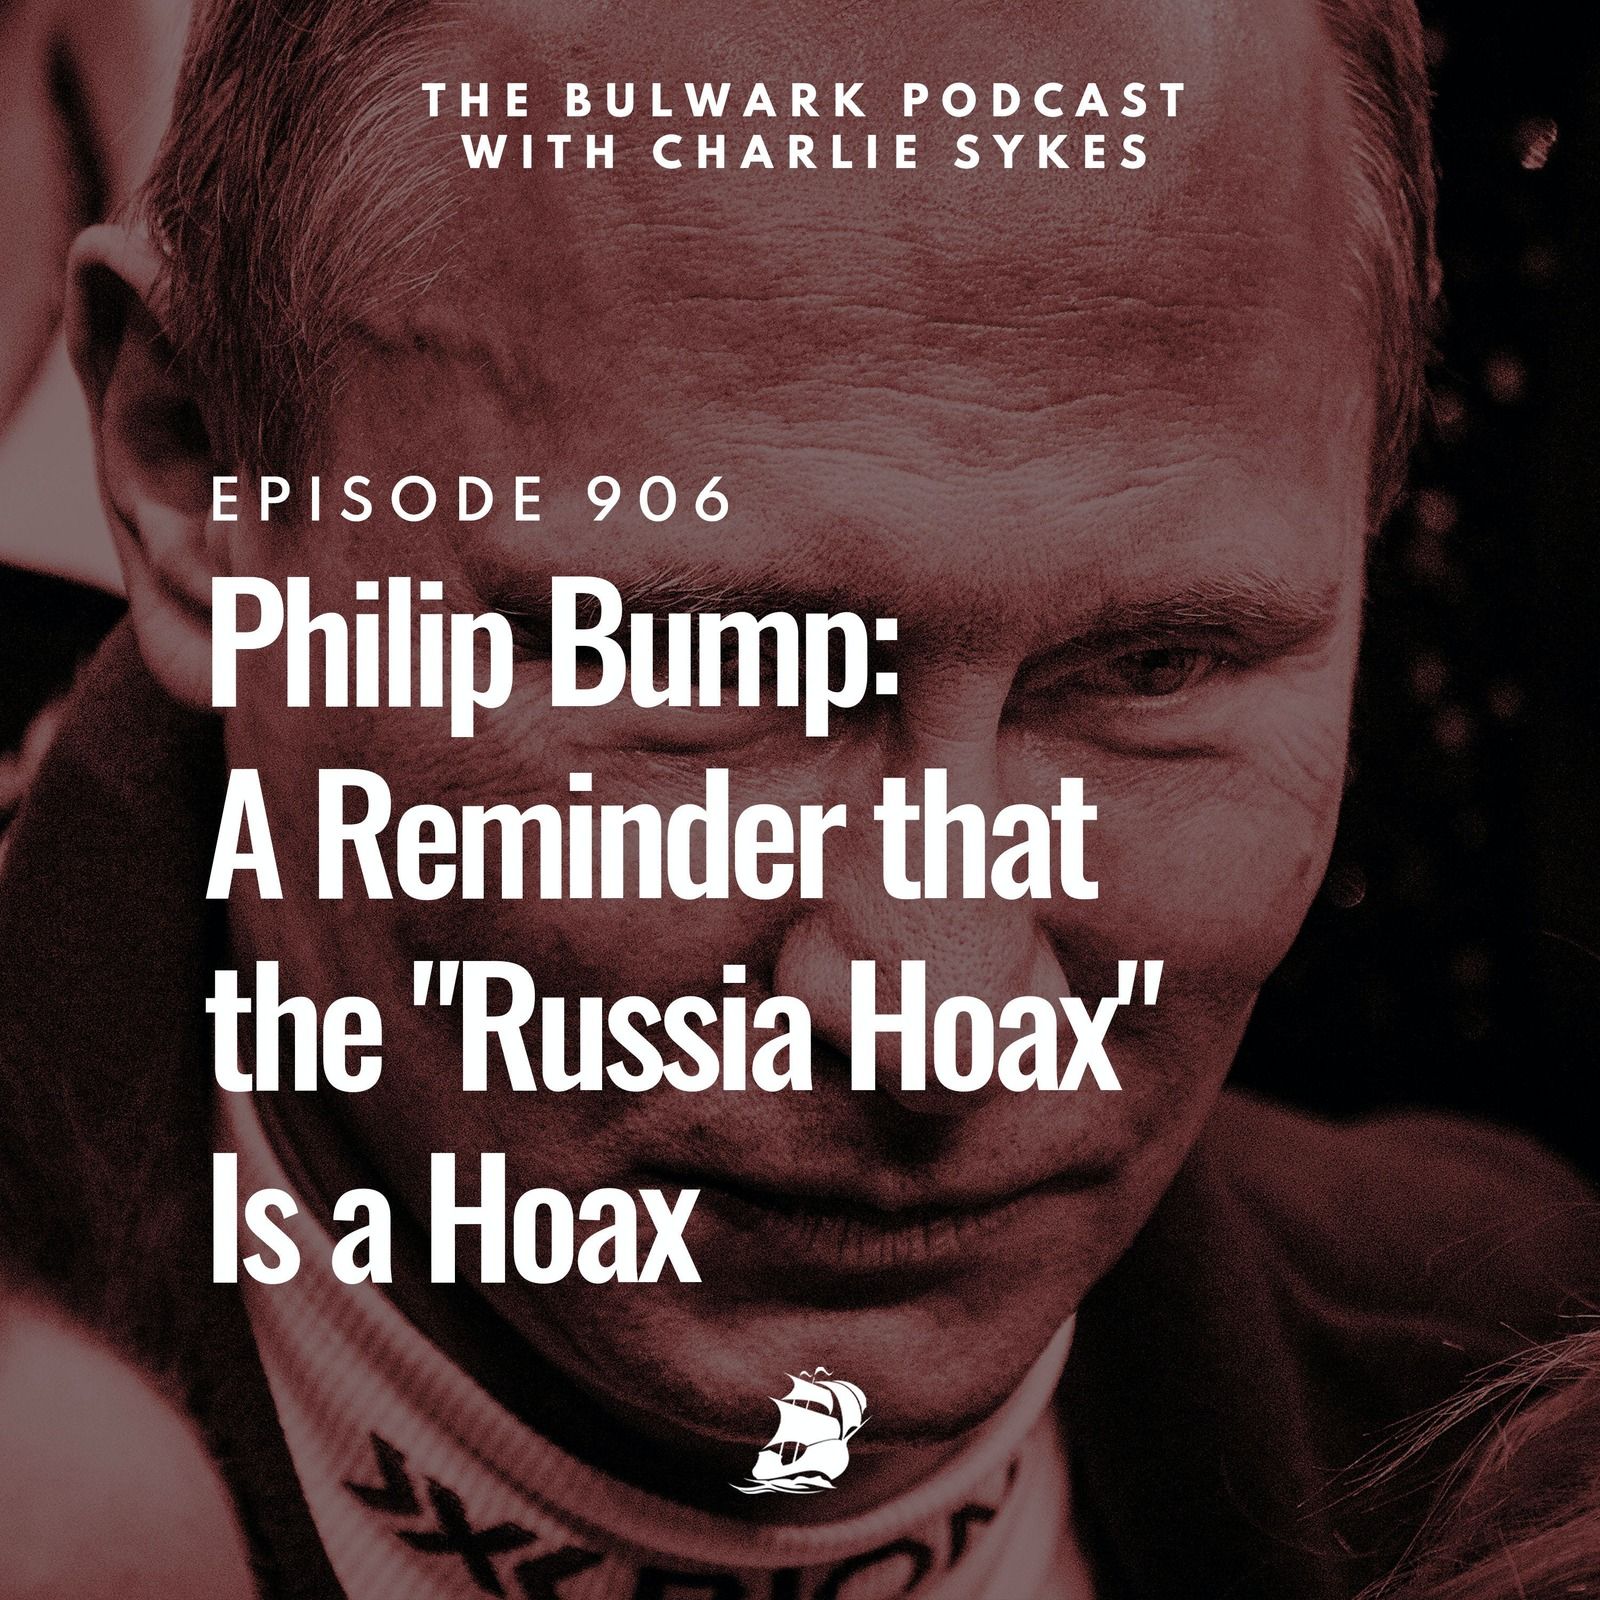 Philip Bump: A Reminder that the "Russia Hoax" Is a Hoax